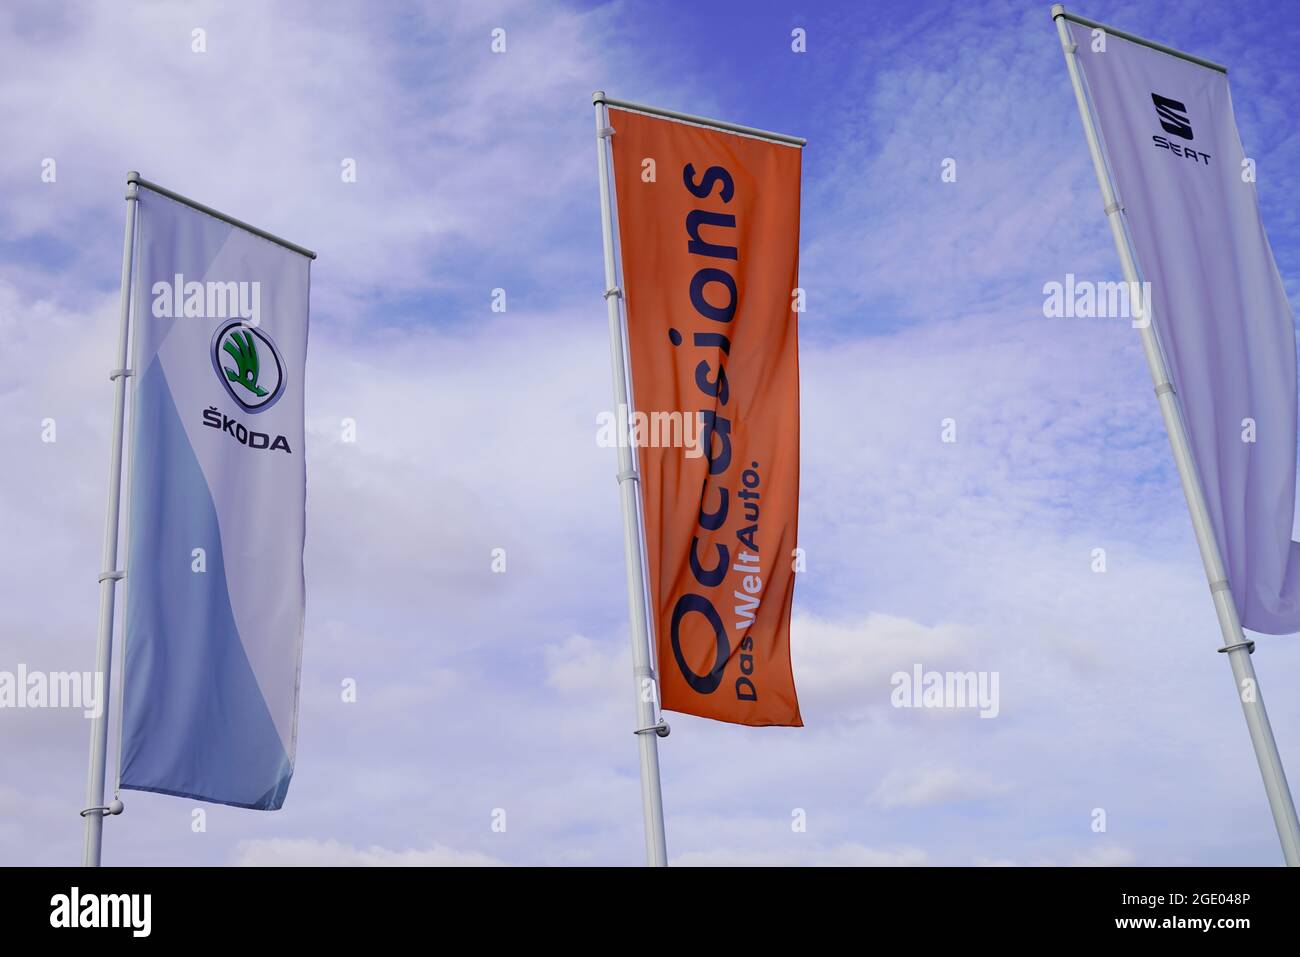 Bordeaux , Aquitaine  France - 12 15 2020 : seat and Skoda das welt auto flags of dealership sign store second hands logo car shop of vw group automob Stock Photo